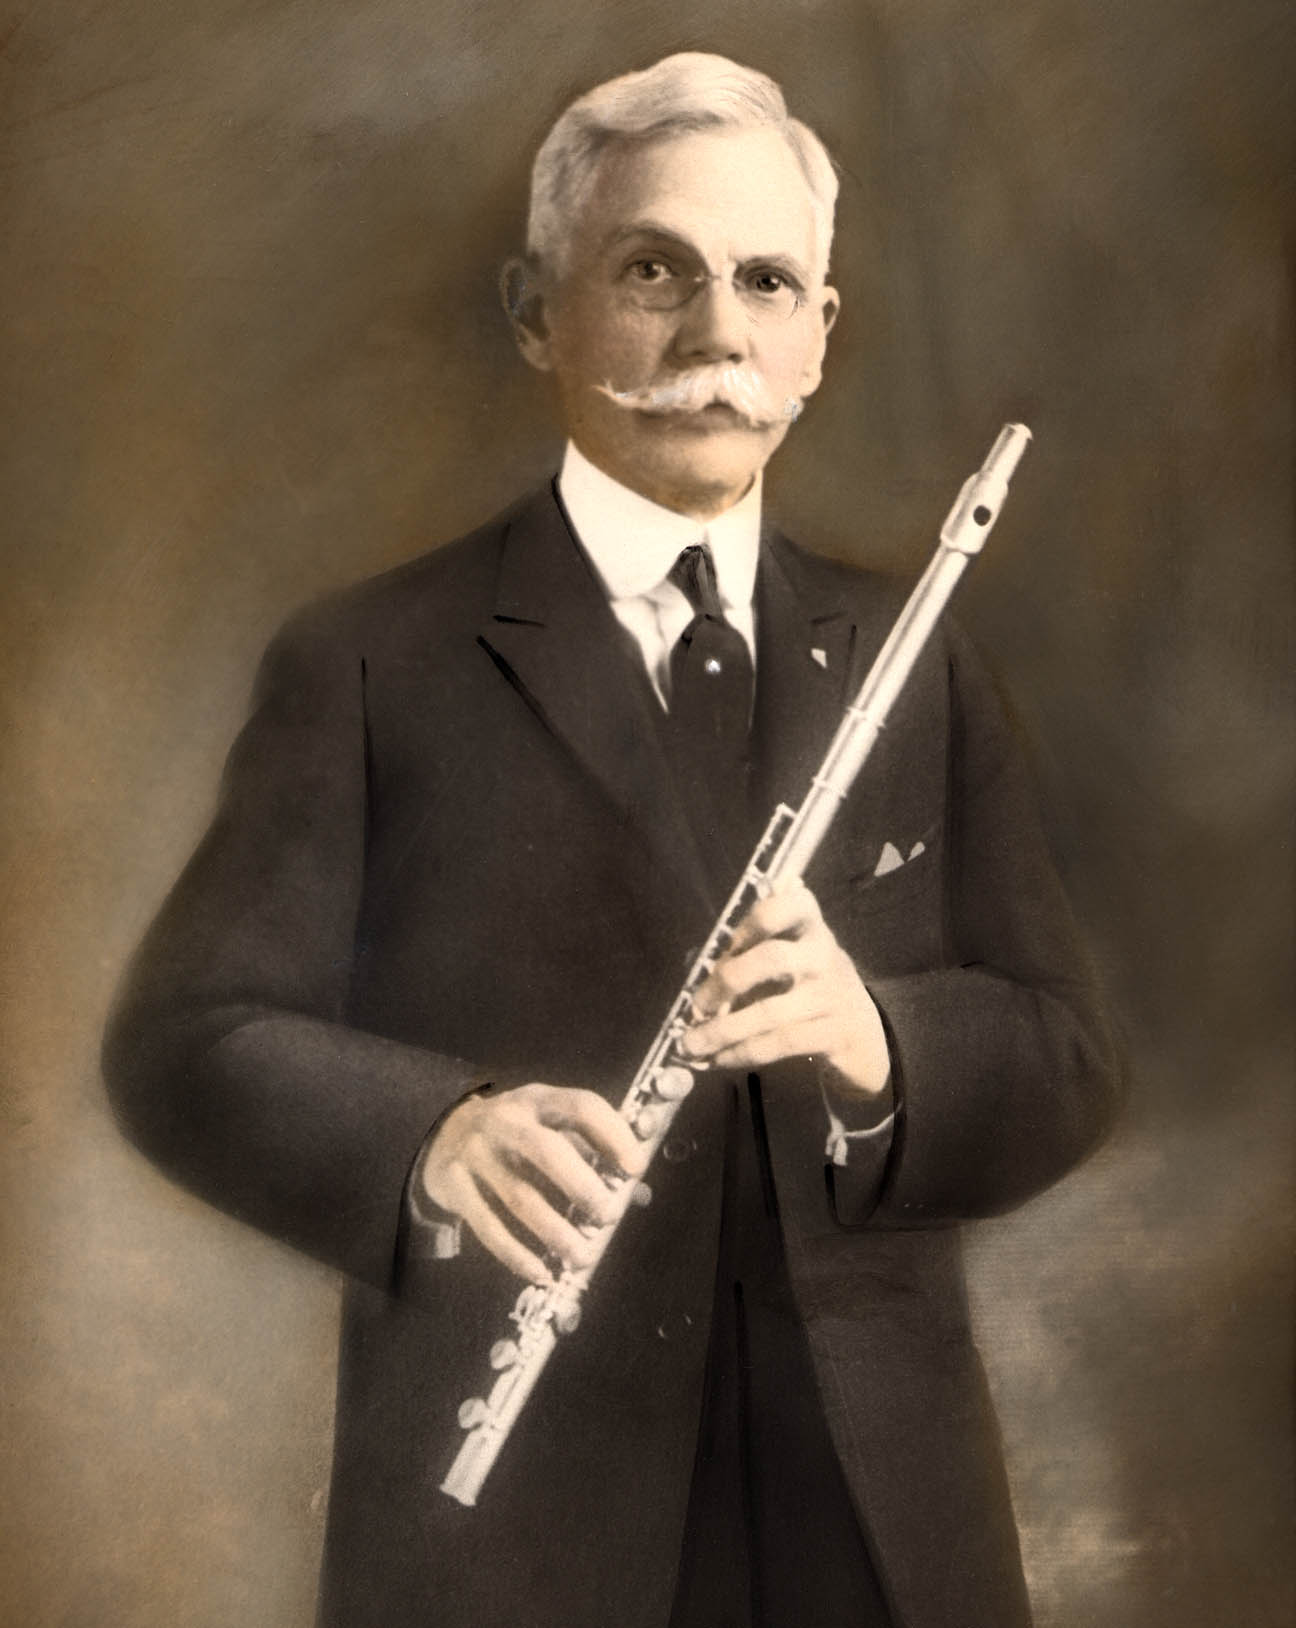 My great-grandfather Linton B. Moore was very proud of his "silver" flute.  So proud, he had his formal portrait taken while holding it.  I'd estimate this photo as being taken around 1910, most likely in southern California.

Don Hall
Yreka, CA